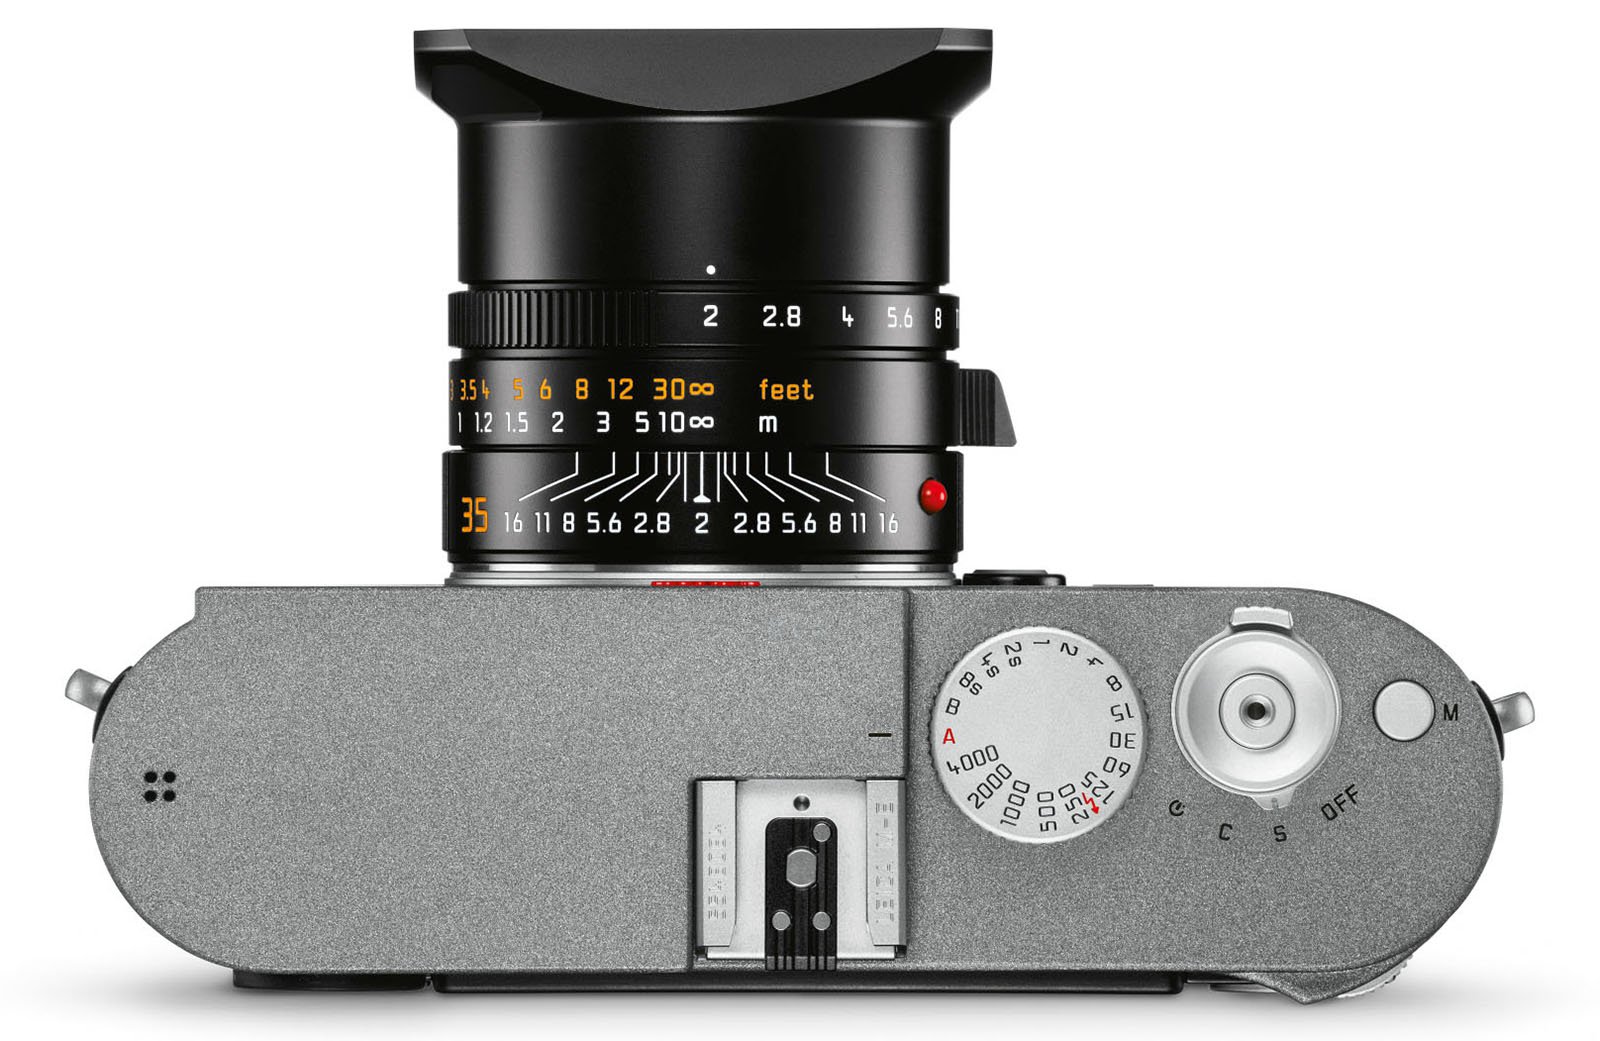 The NEW Leica $3995 Digital Rangefinder is AWESOME. The M-E 240 